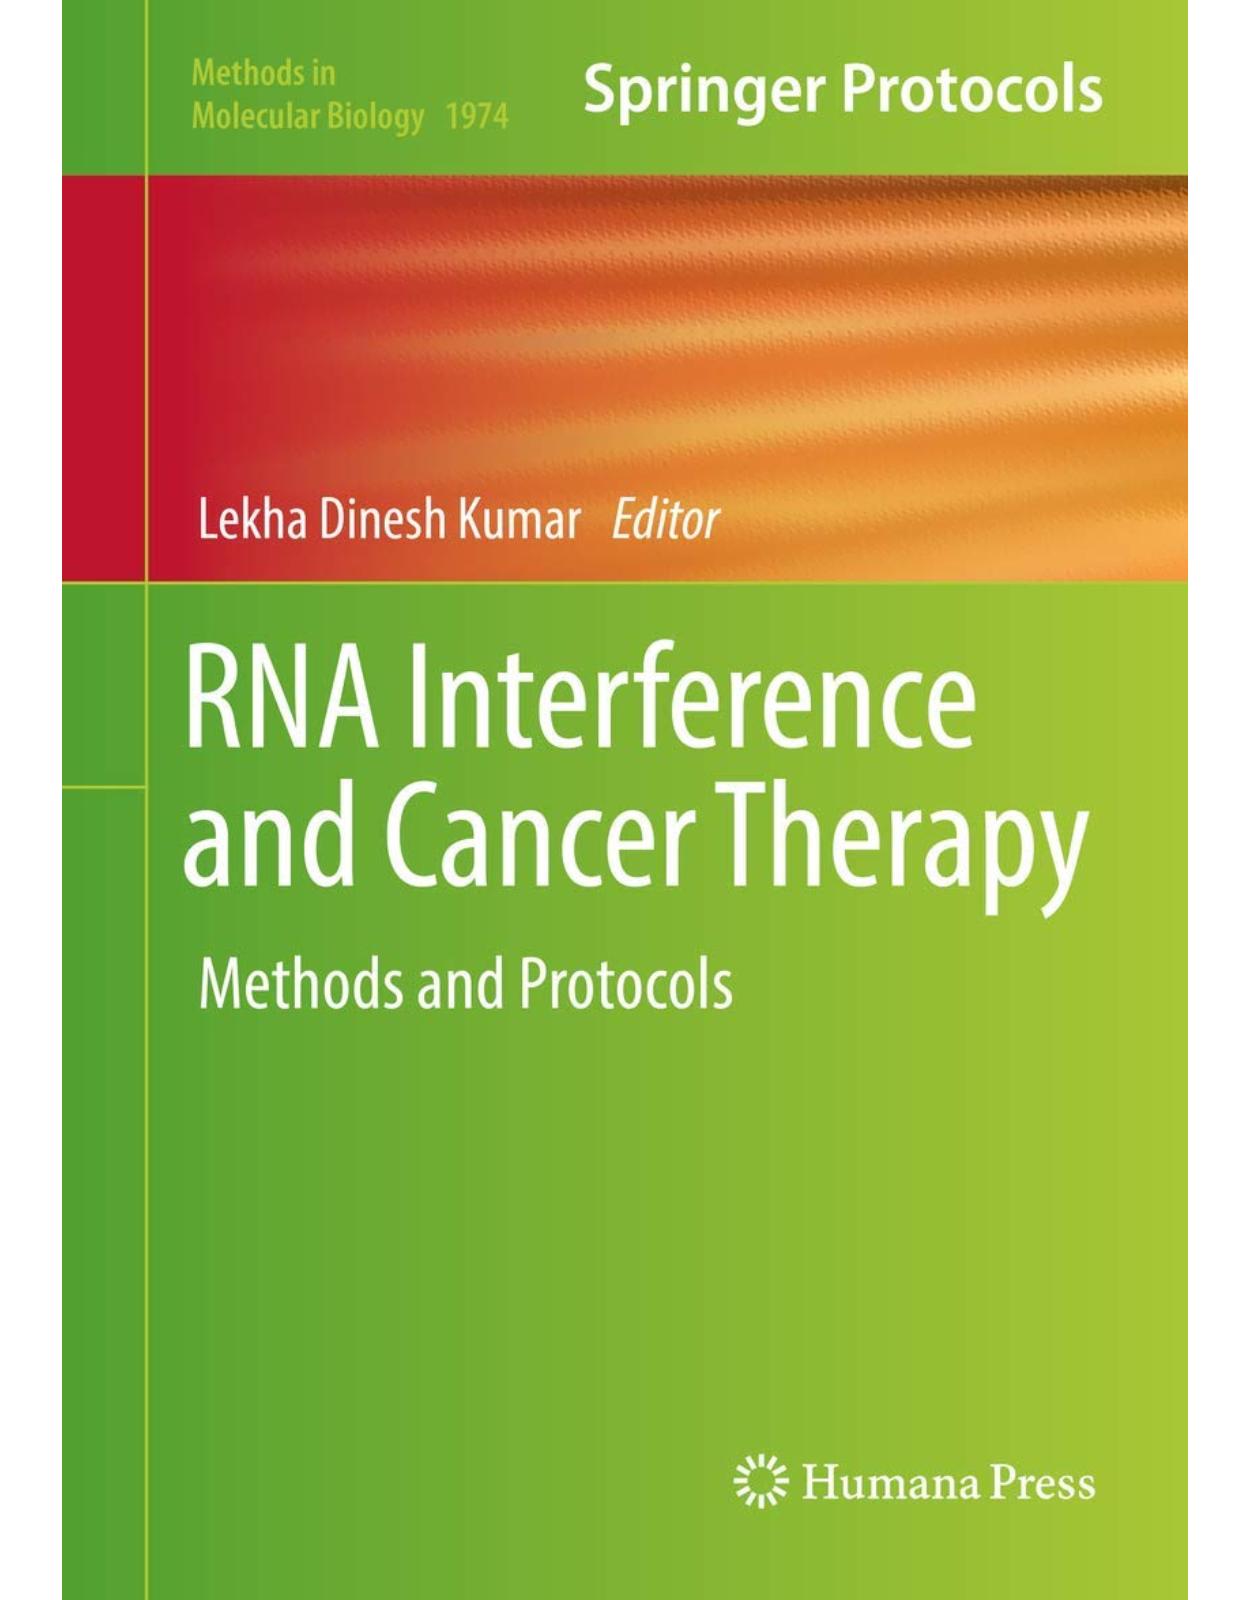 RNA Interference and Cancer Therapy. Methods and Protocols